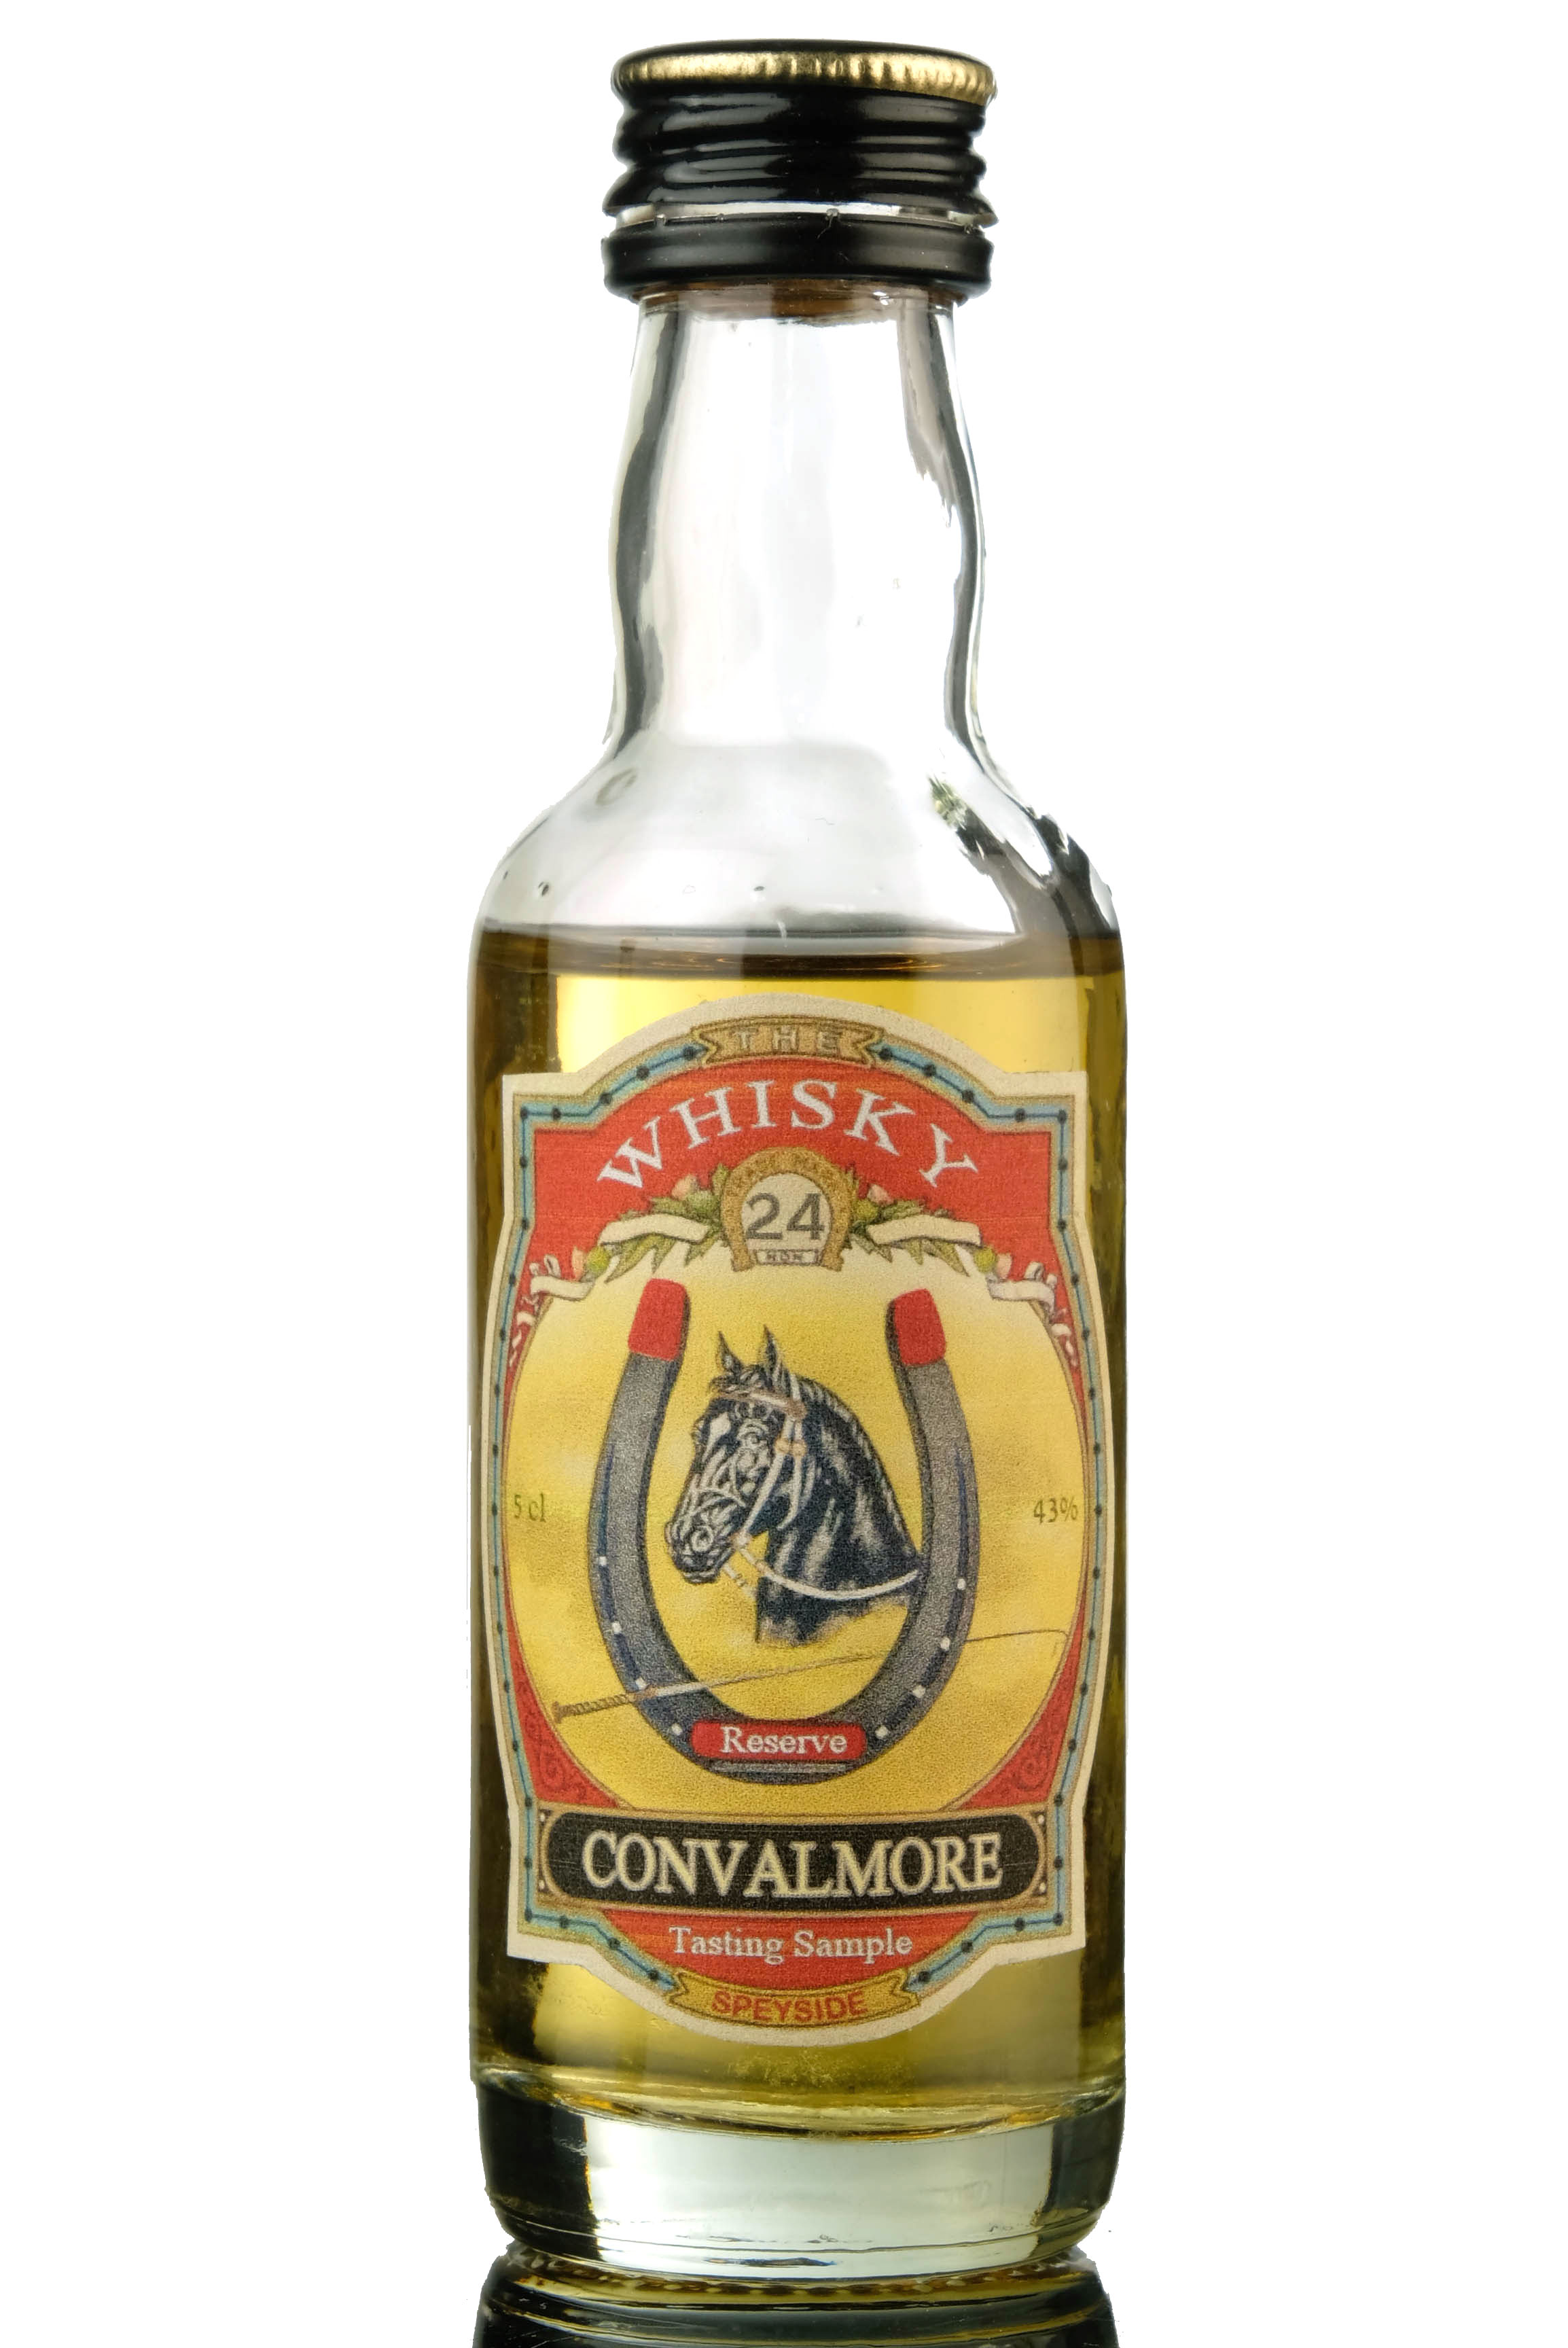 Convalmore 24 Year Old Miniature